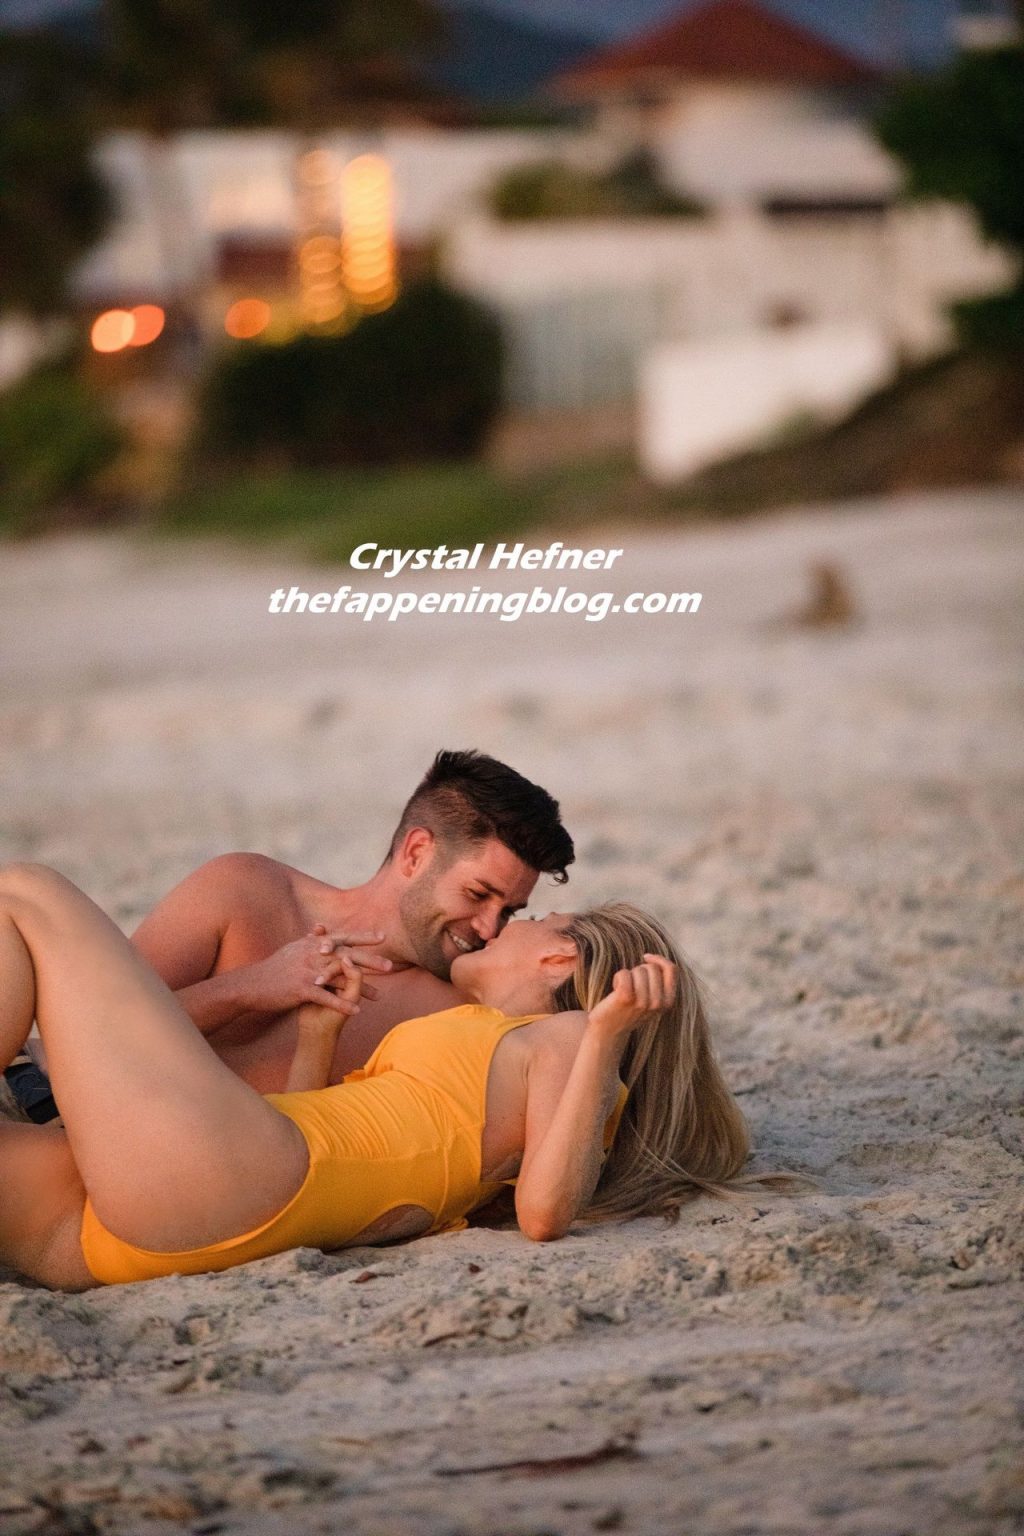 Crystal Hefner Shares Passionate Kisses with Hunky Spaceship Engineer Beau (18 Photos)